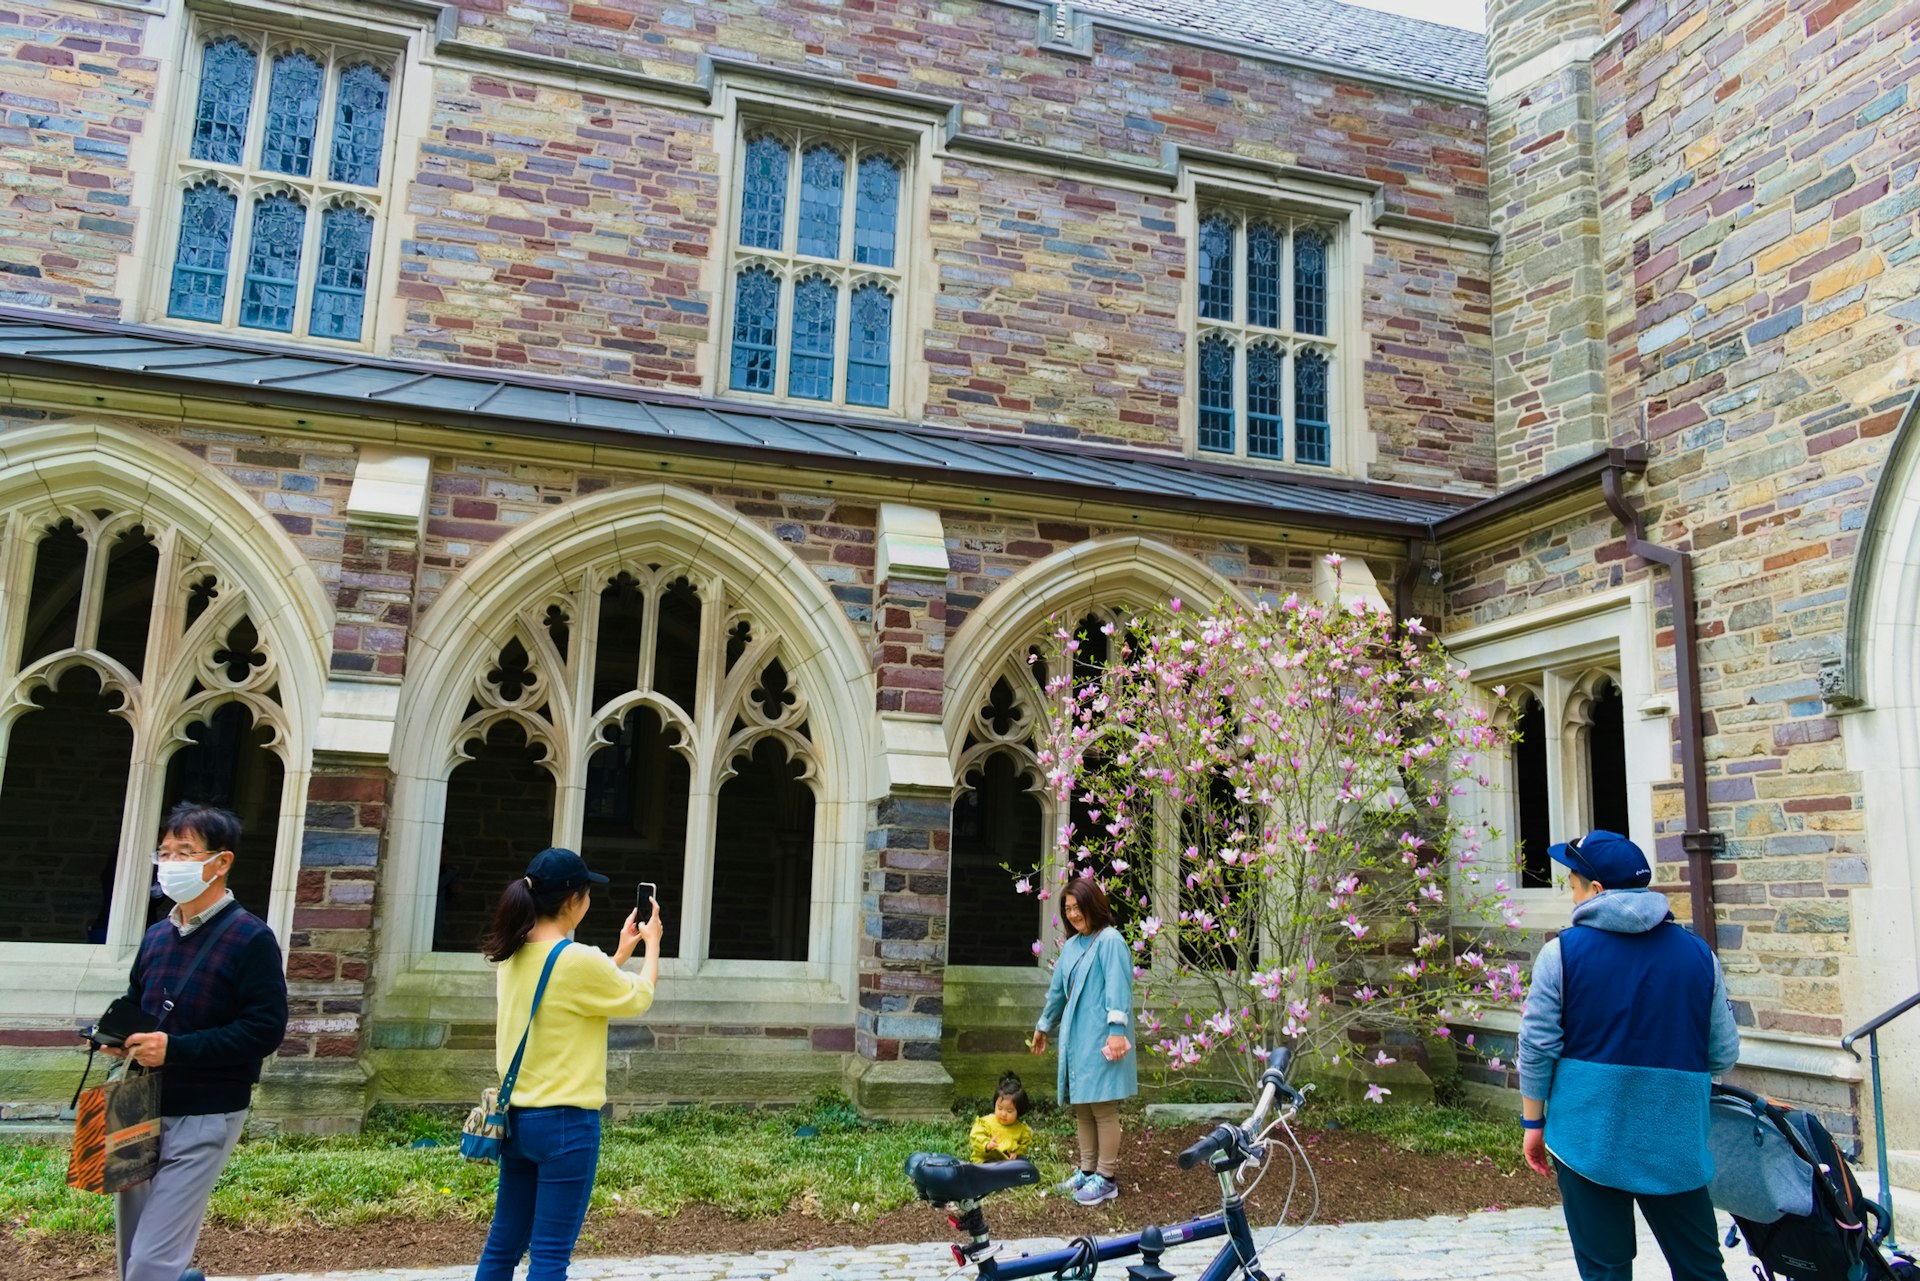 Tourists take photos at one of the Princeton university campus building exterior